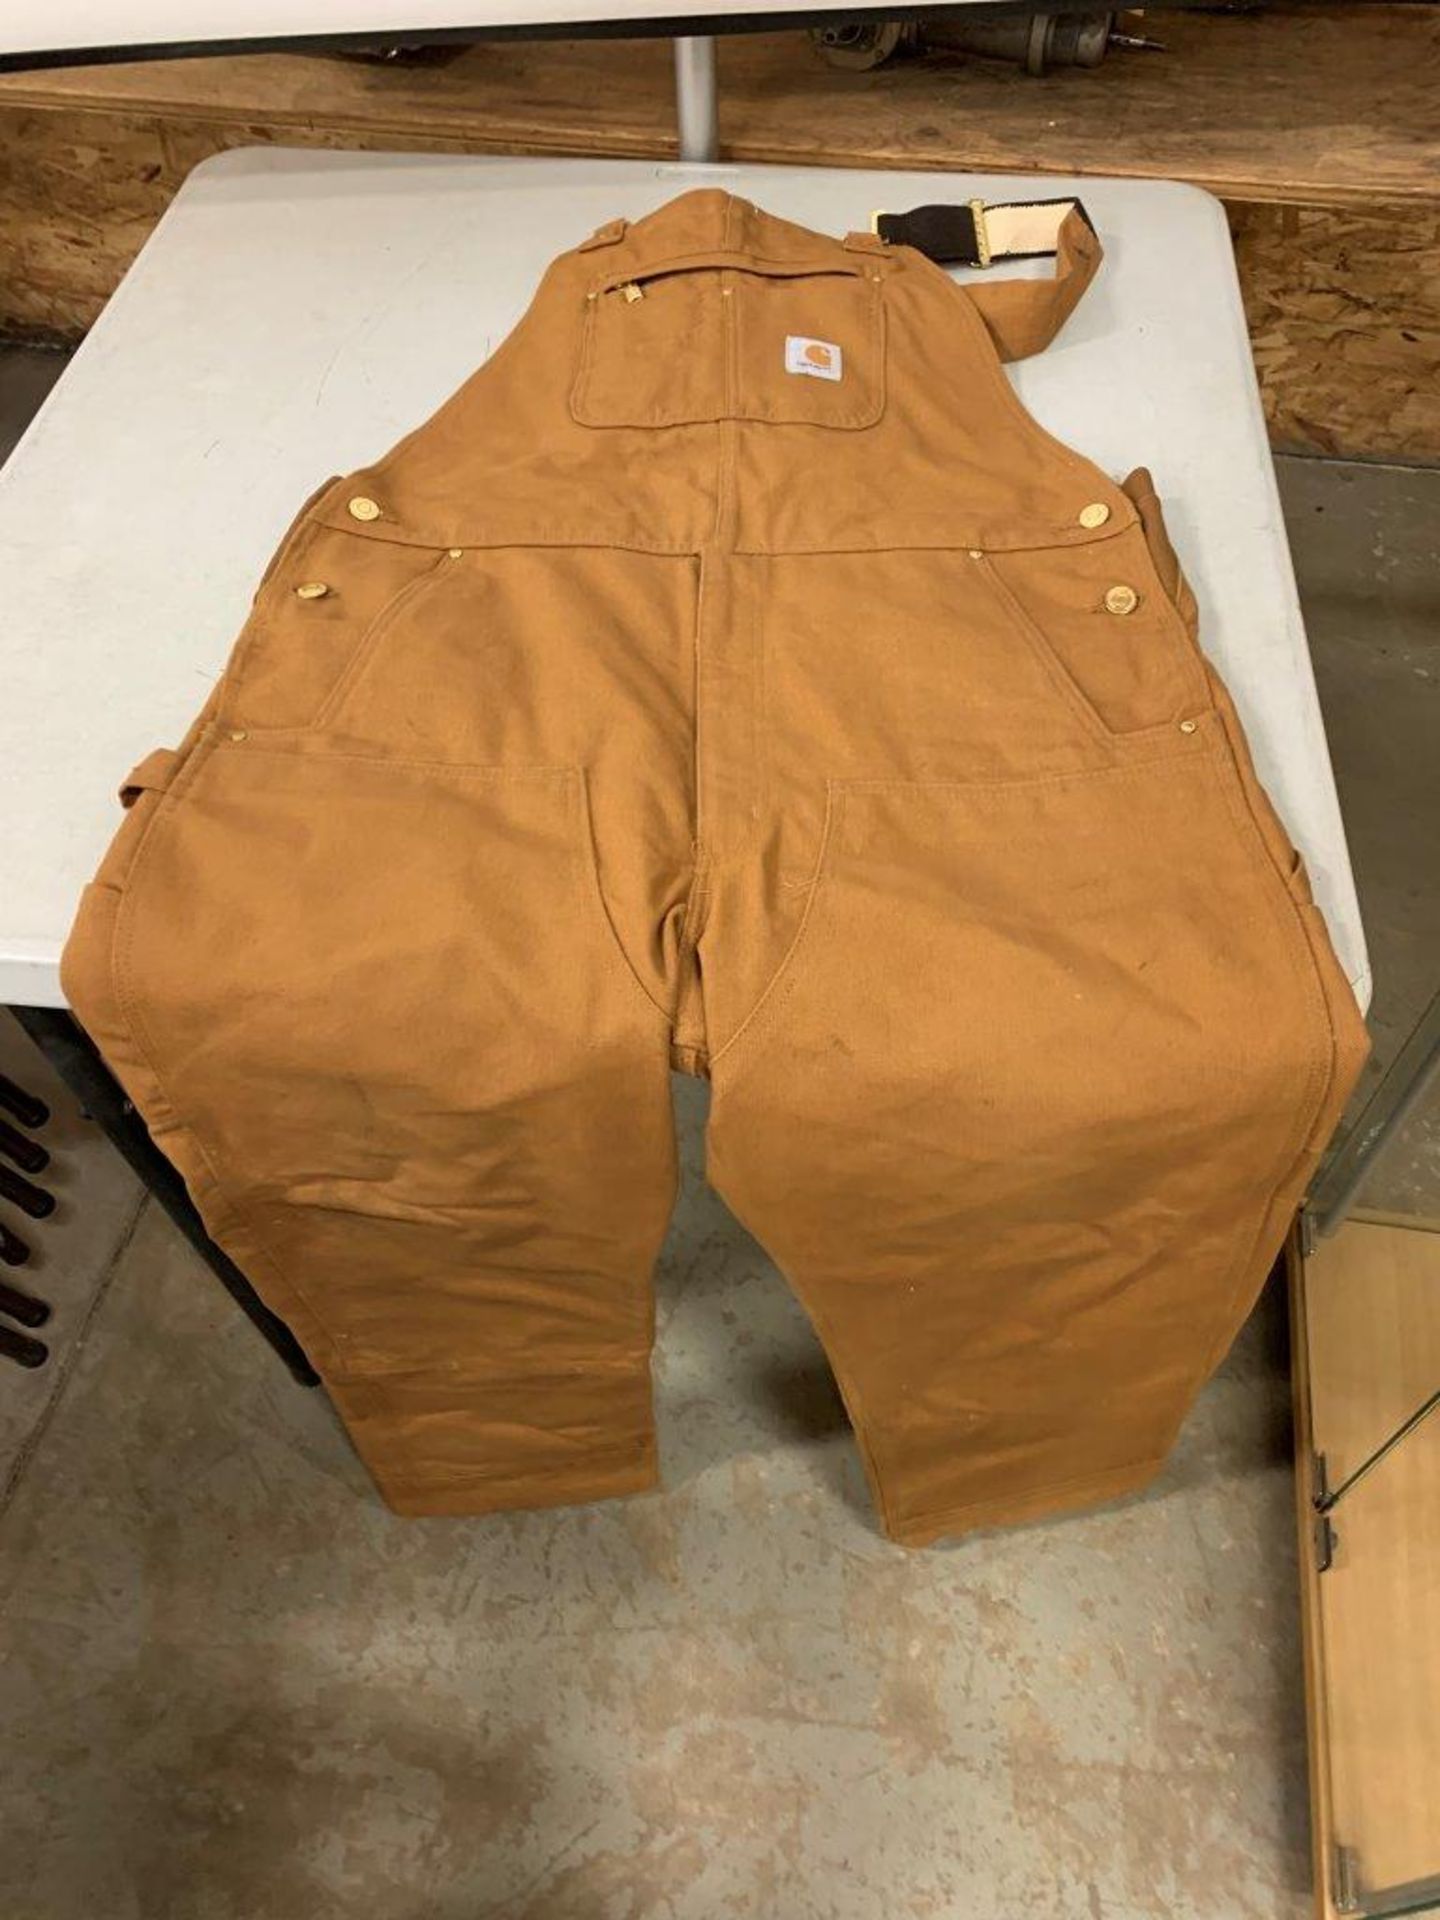 CARHART 38x32 OVERALLS - Image 2 of 3